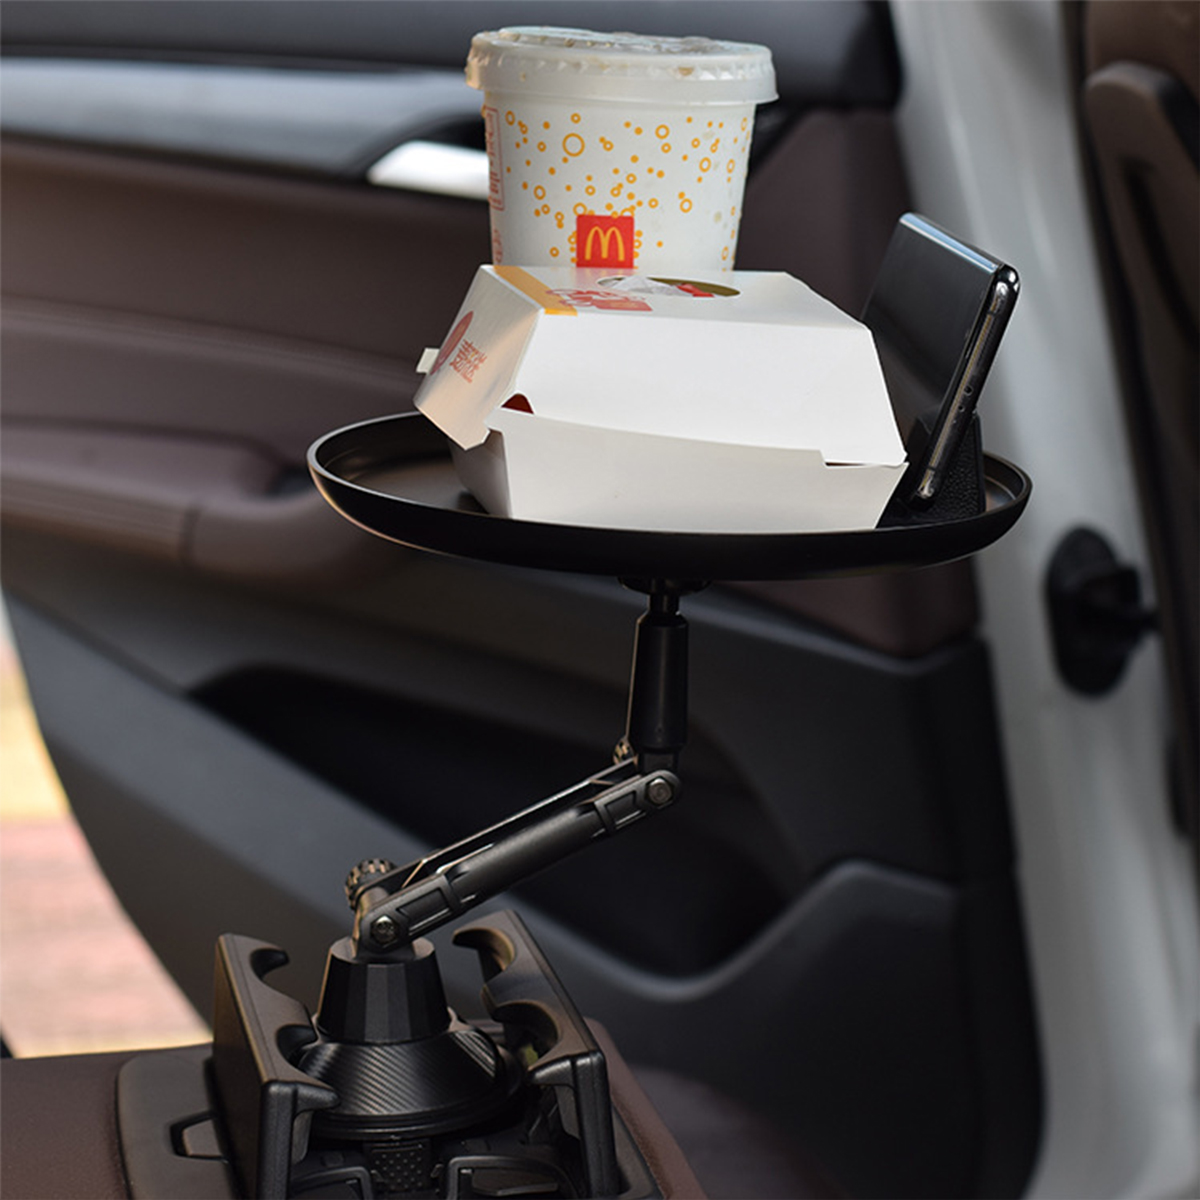 Universal-360-Rotation-Long-Flexible-Arm-SUV-Truck-Car-Water-Cup-Mobile-Phone-Holder-Mount-Stand-for-1885641-9